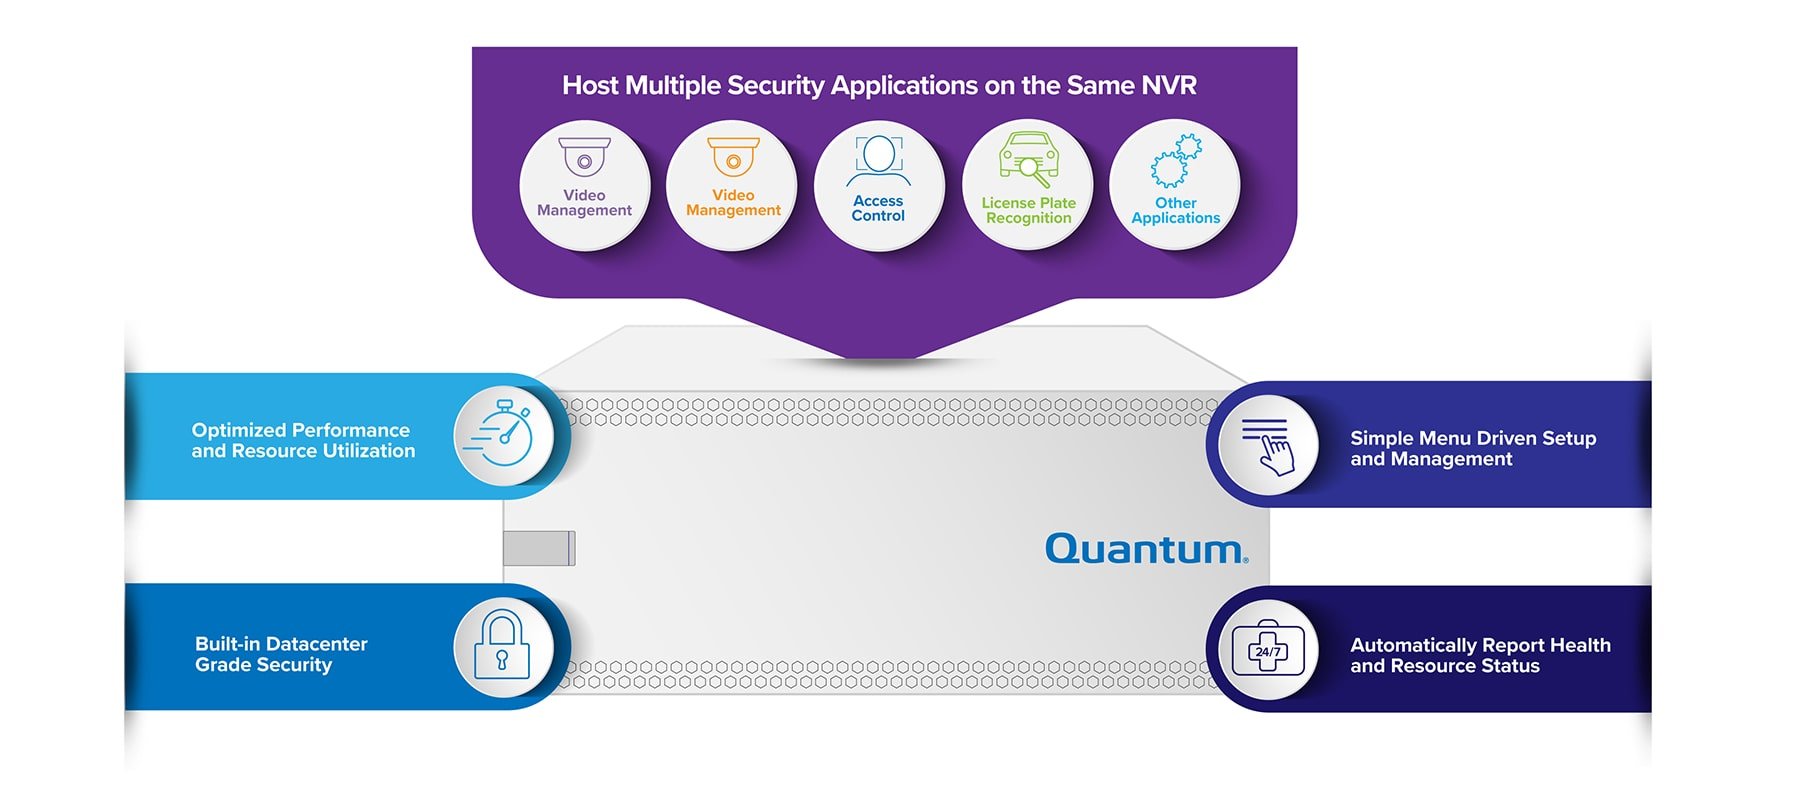 Quantum Smart NVRs Lower Cost and Complexity Through Innovative Software